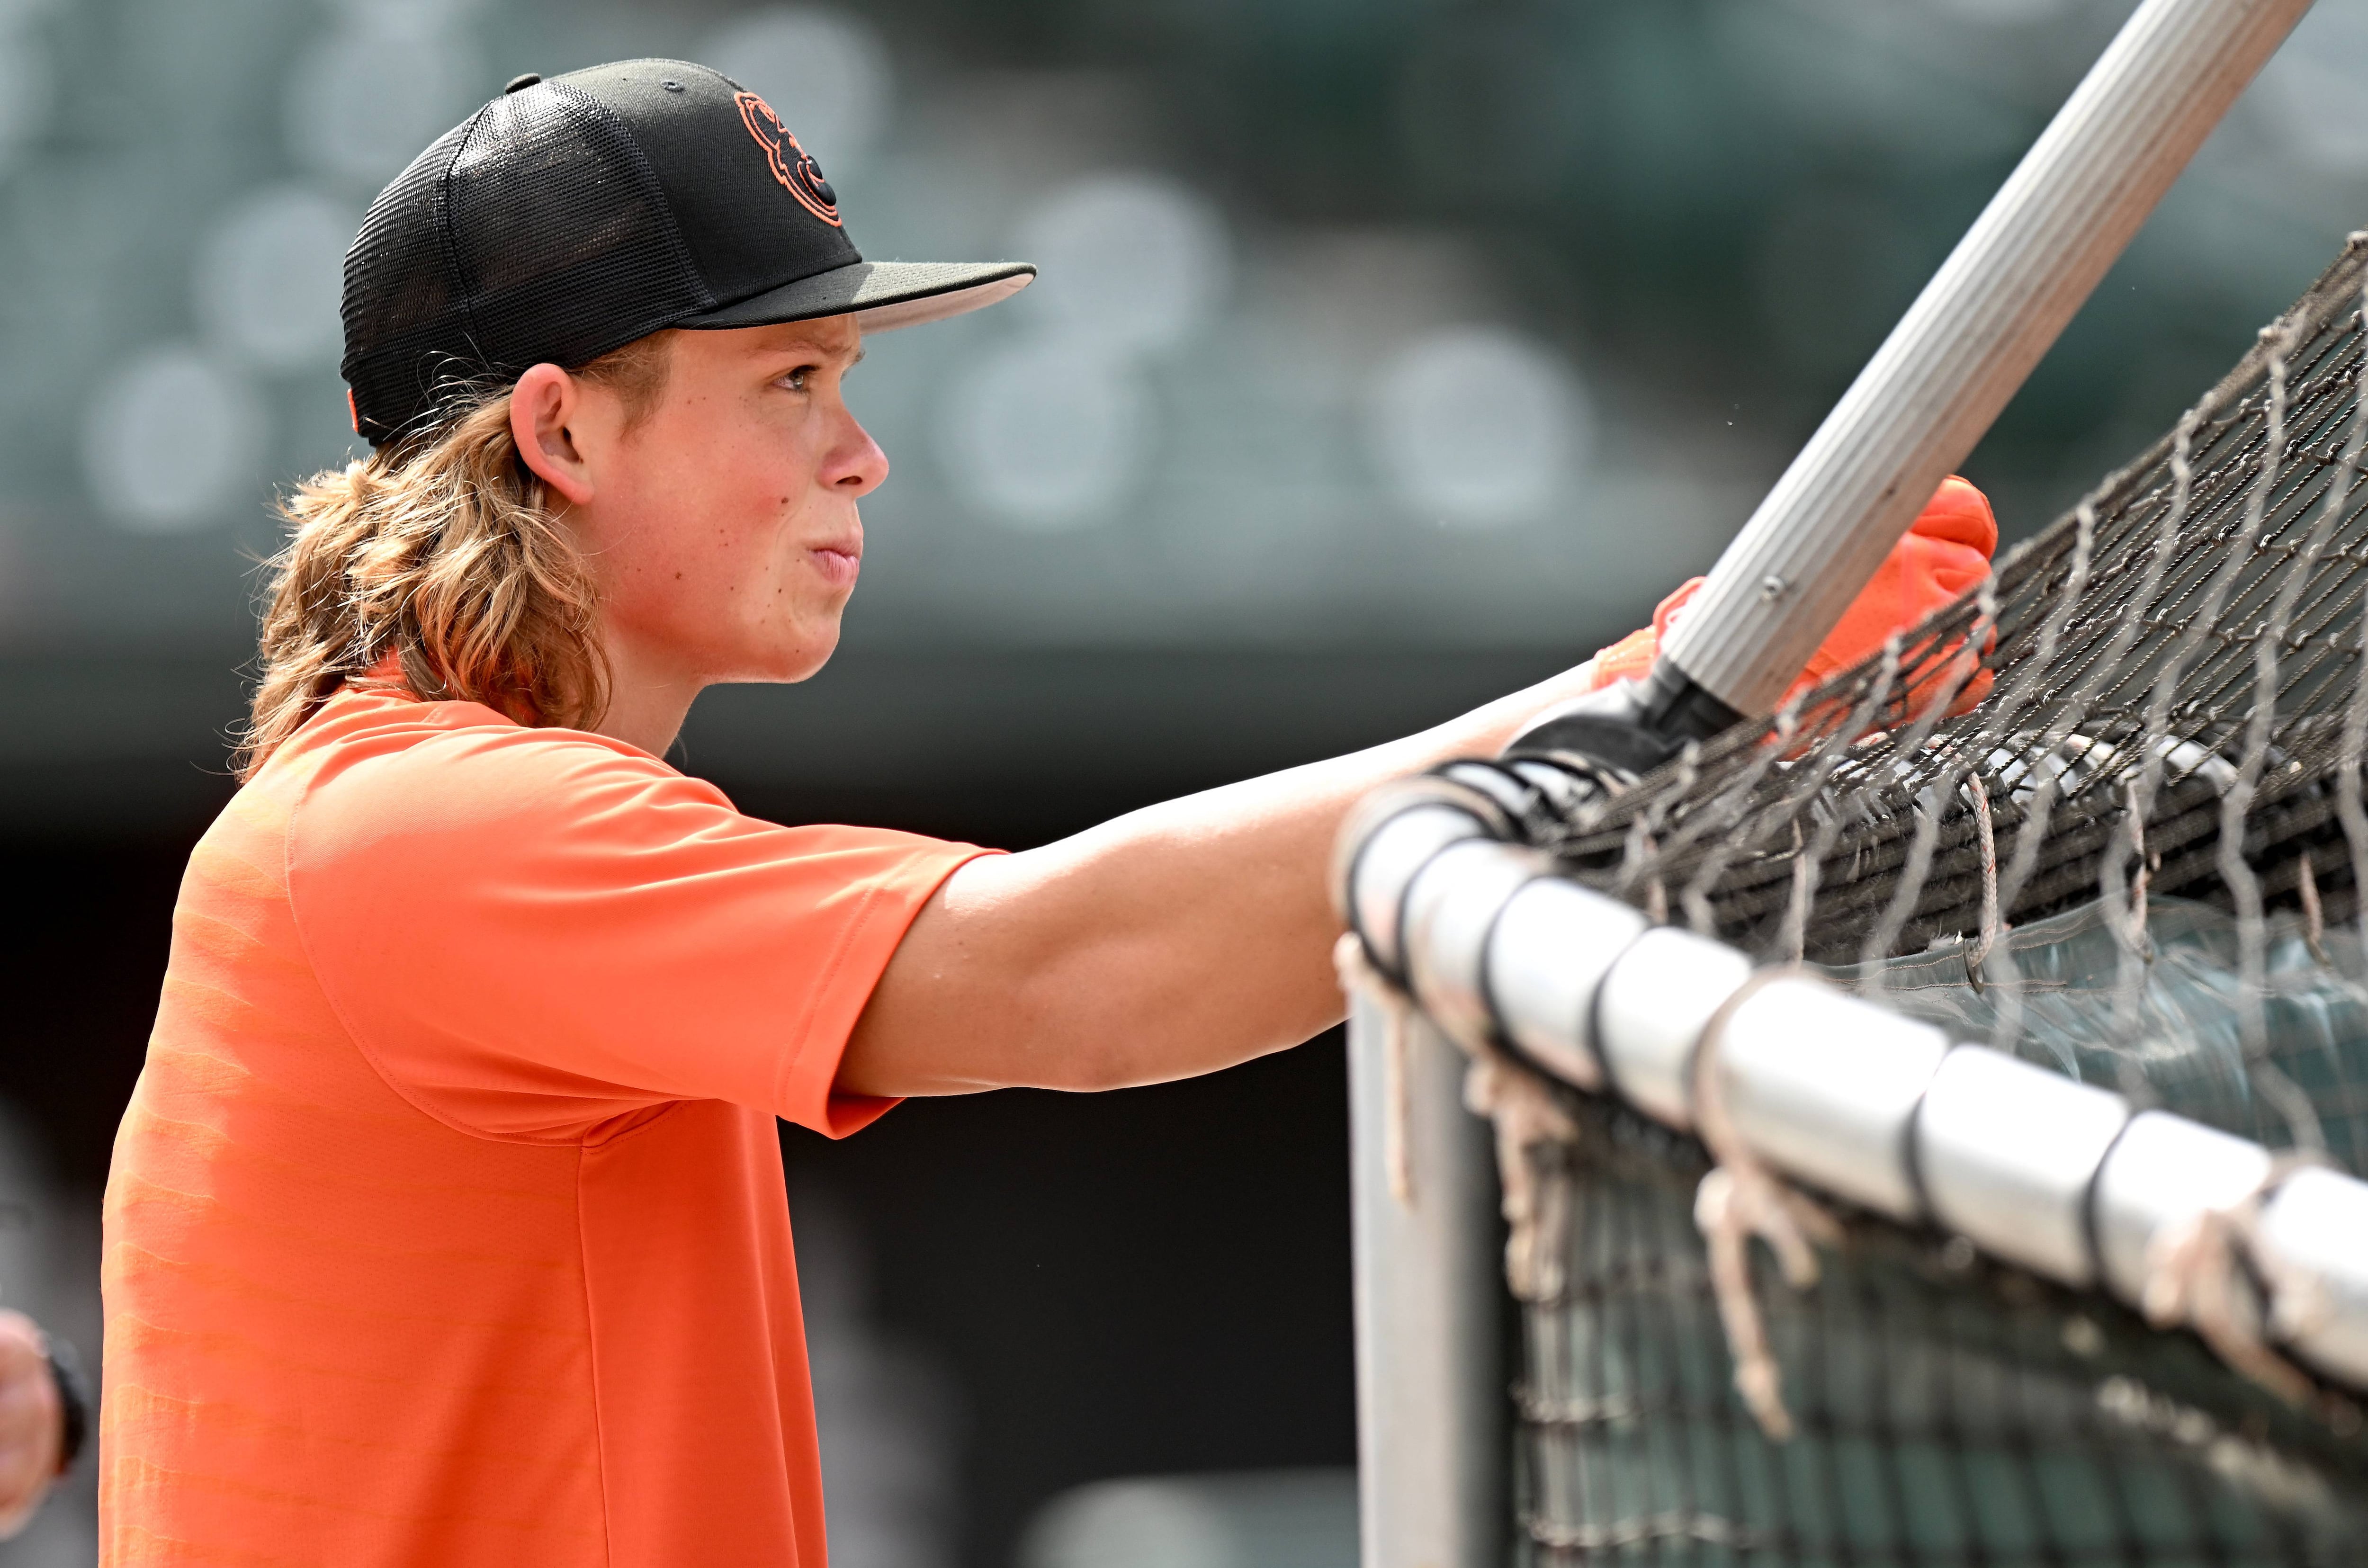 BALTIMORE, MARYLAND - JULY 27: 2022 Baltimore Orioles first round pick, and Number 1 overall selection of the 2022 First-Year Player Draft, Jackson Holliday watches batting practice before the game between the Baltimore Orioles and the Tampa Bay Rays at Oriole Park at Camden Yards on July 27, 2022 in Baltimore, Maryland.